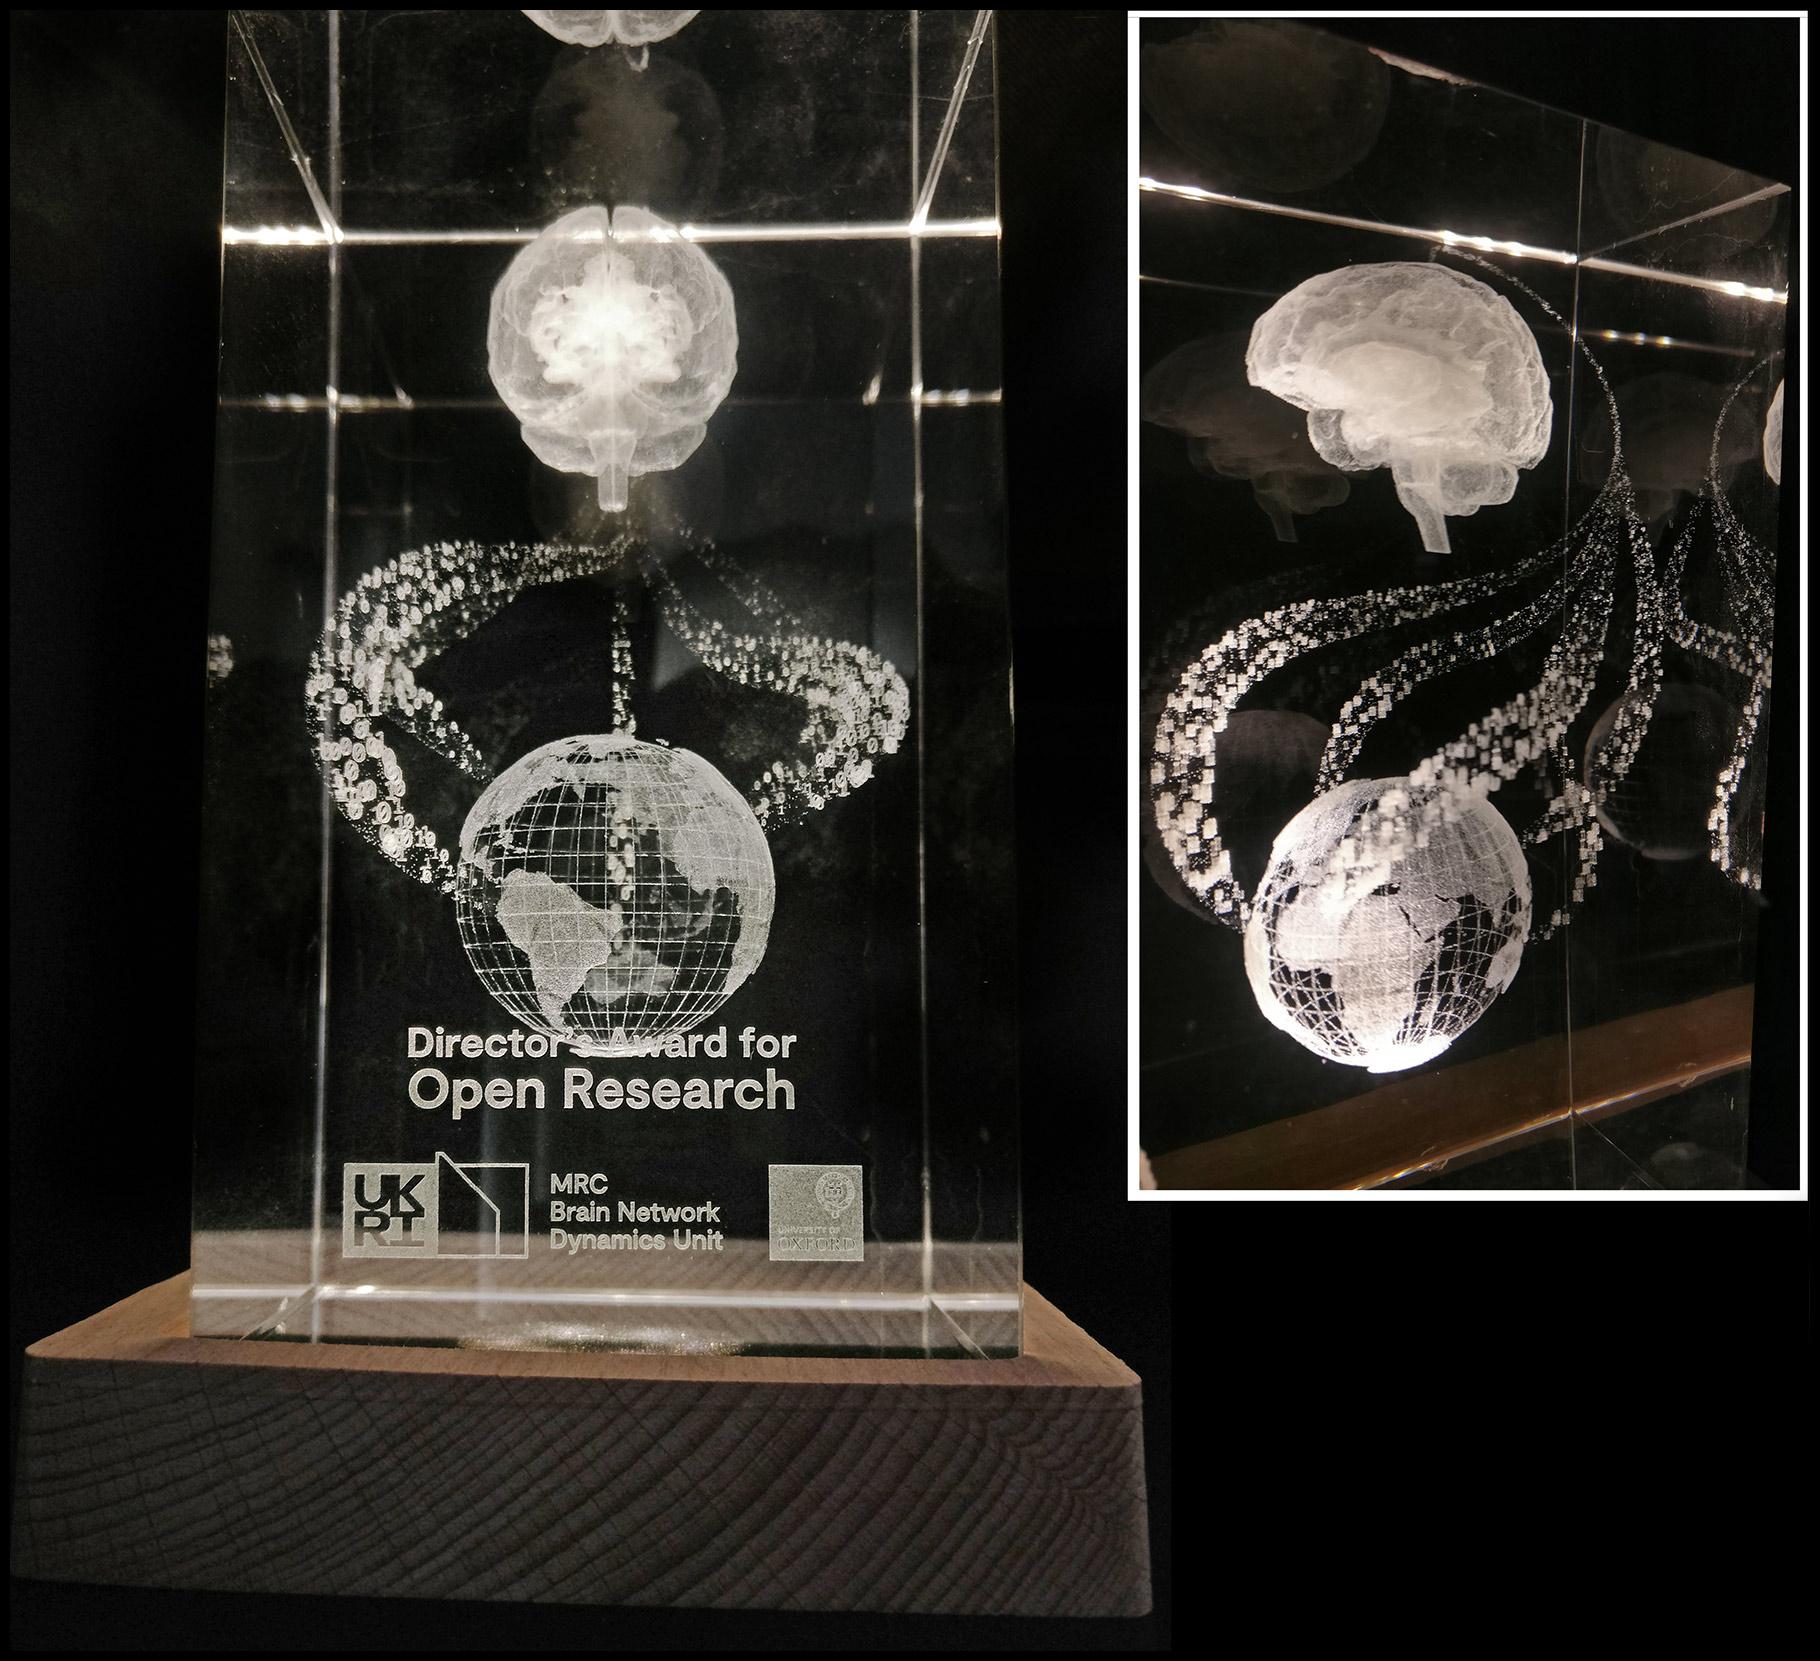 Photo of the Director’s Award for Open Research.